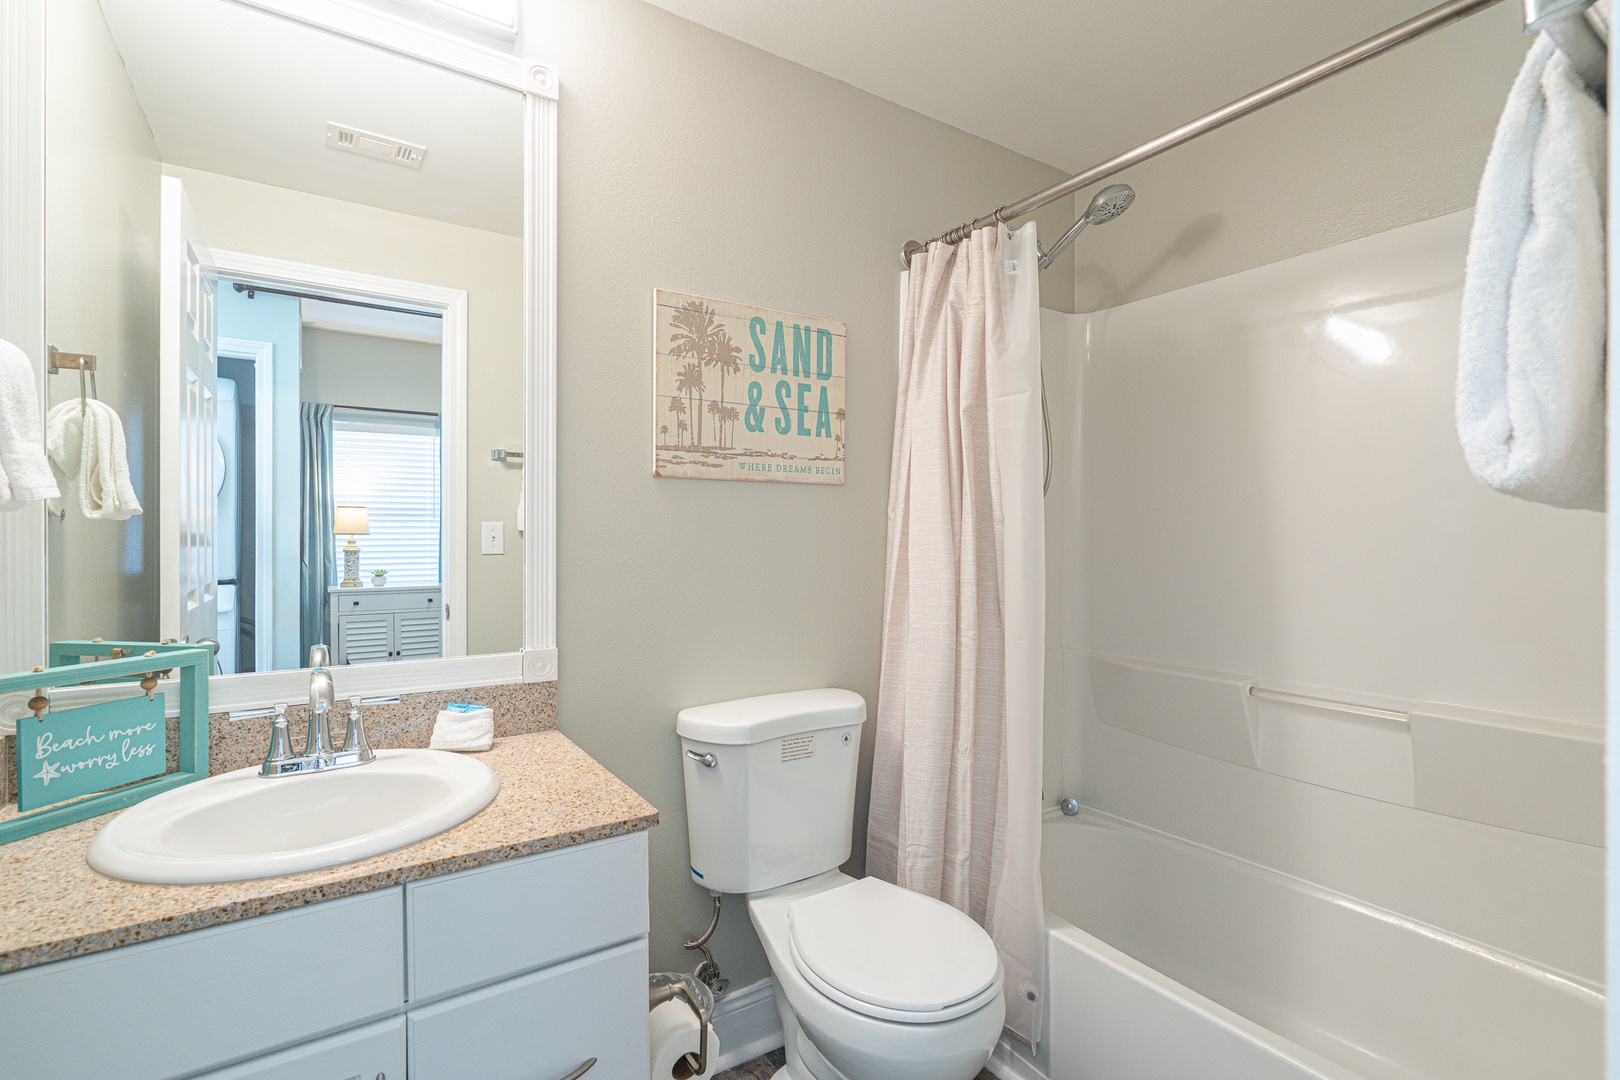 This full bathroom includes a single vanity & shower/tub combo